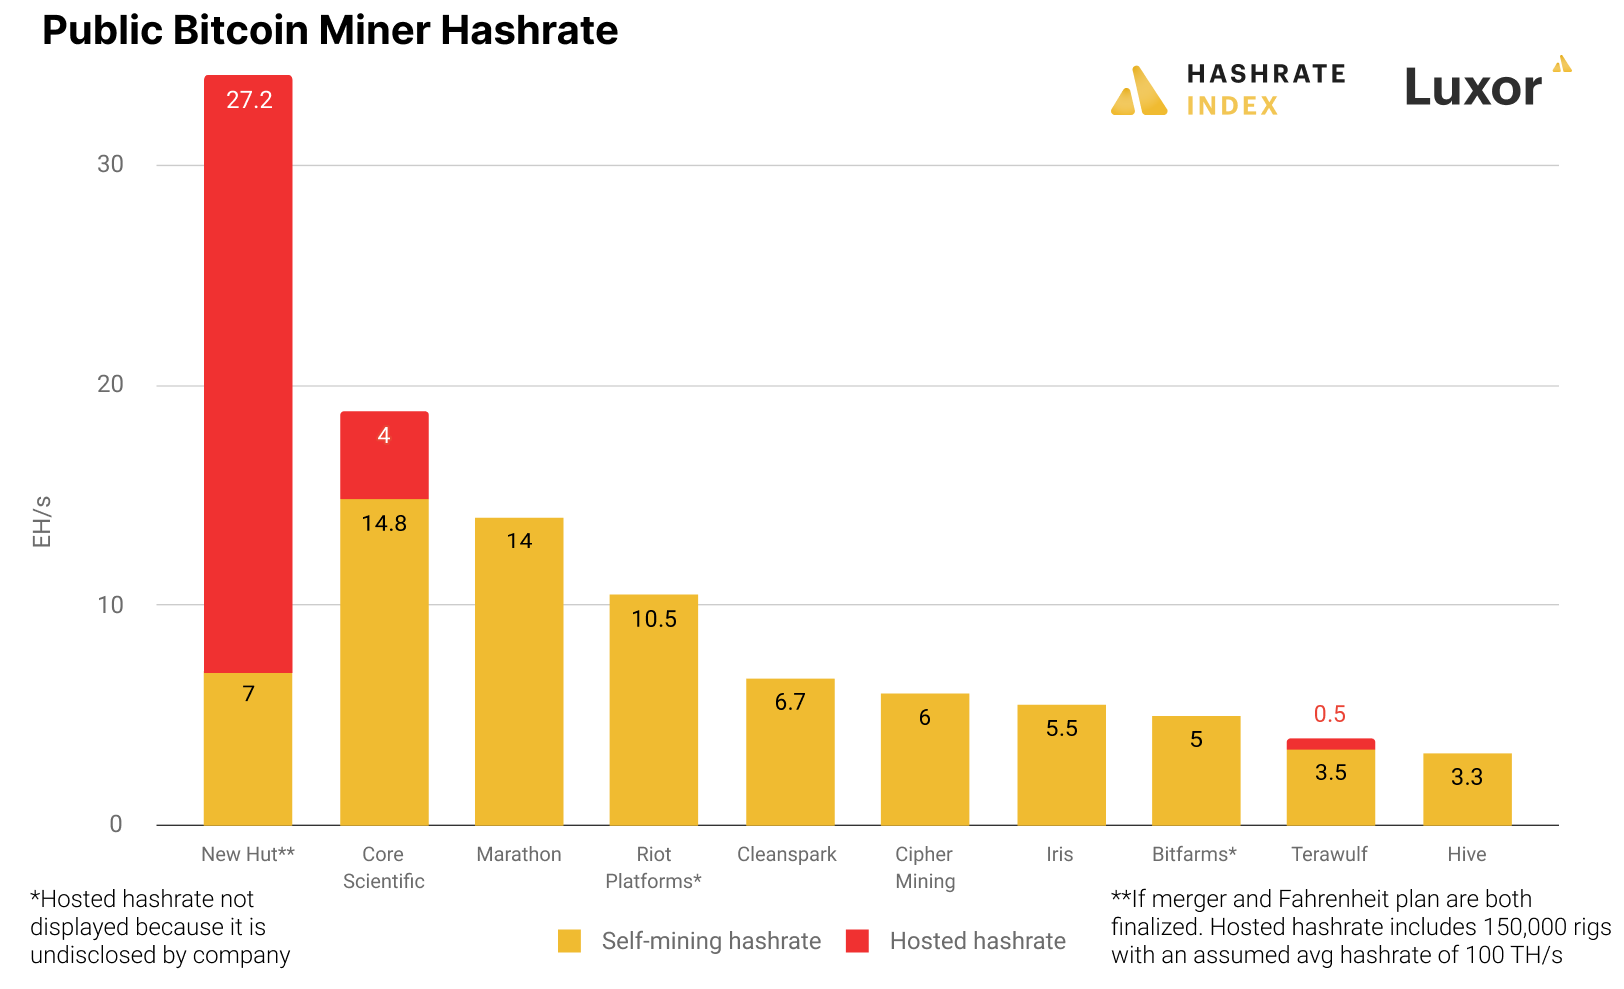 Public Bitcoin miners total hashrate under management | Source: company press releases, presentations, public filings